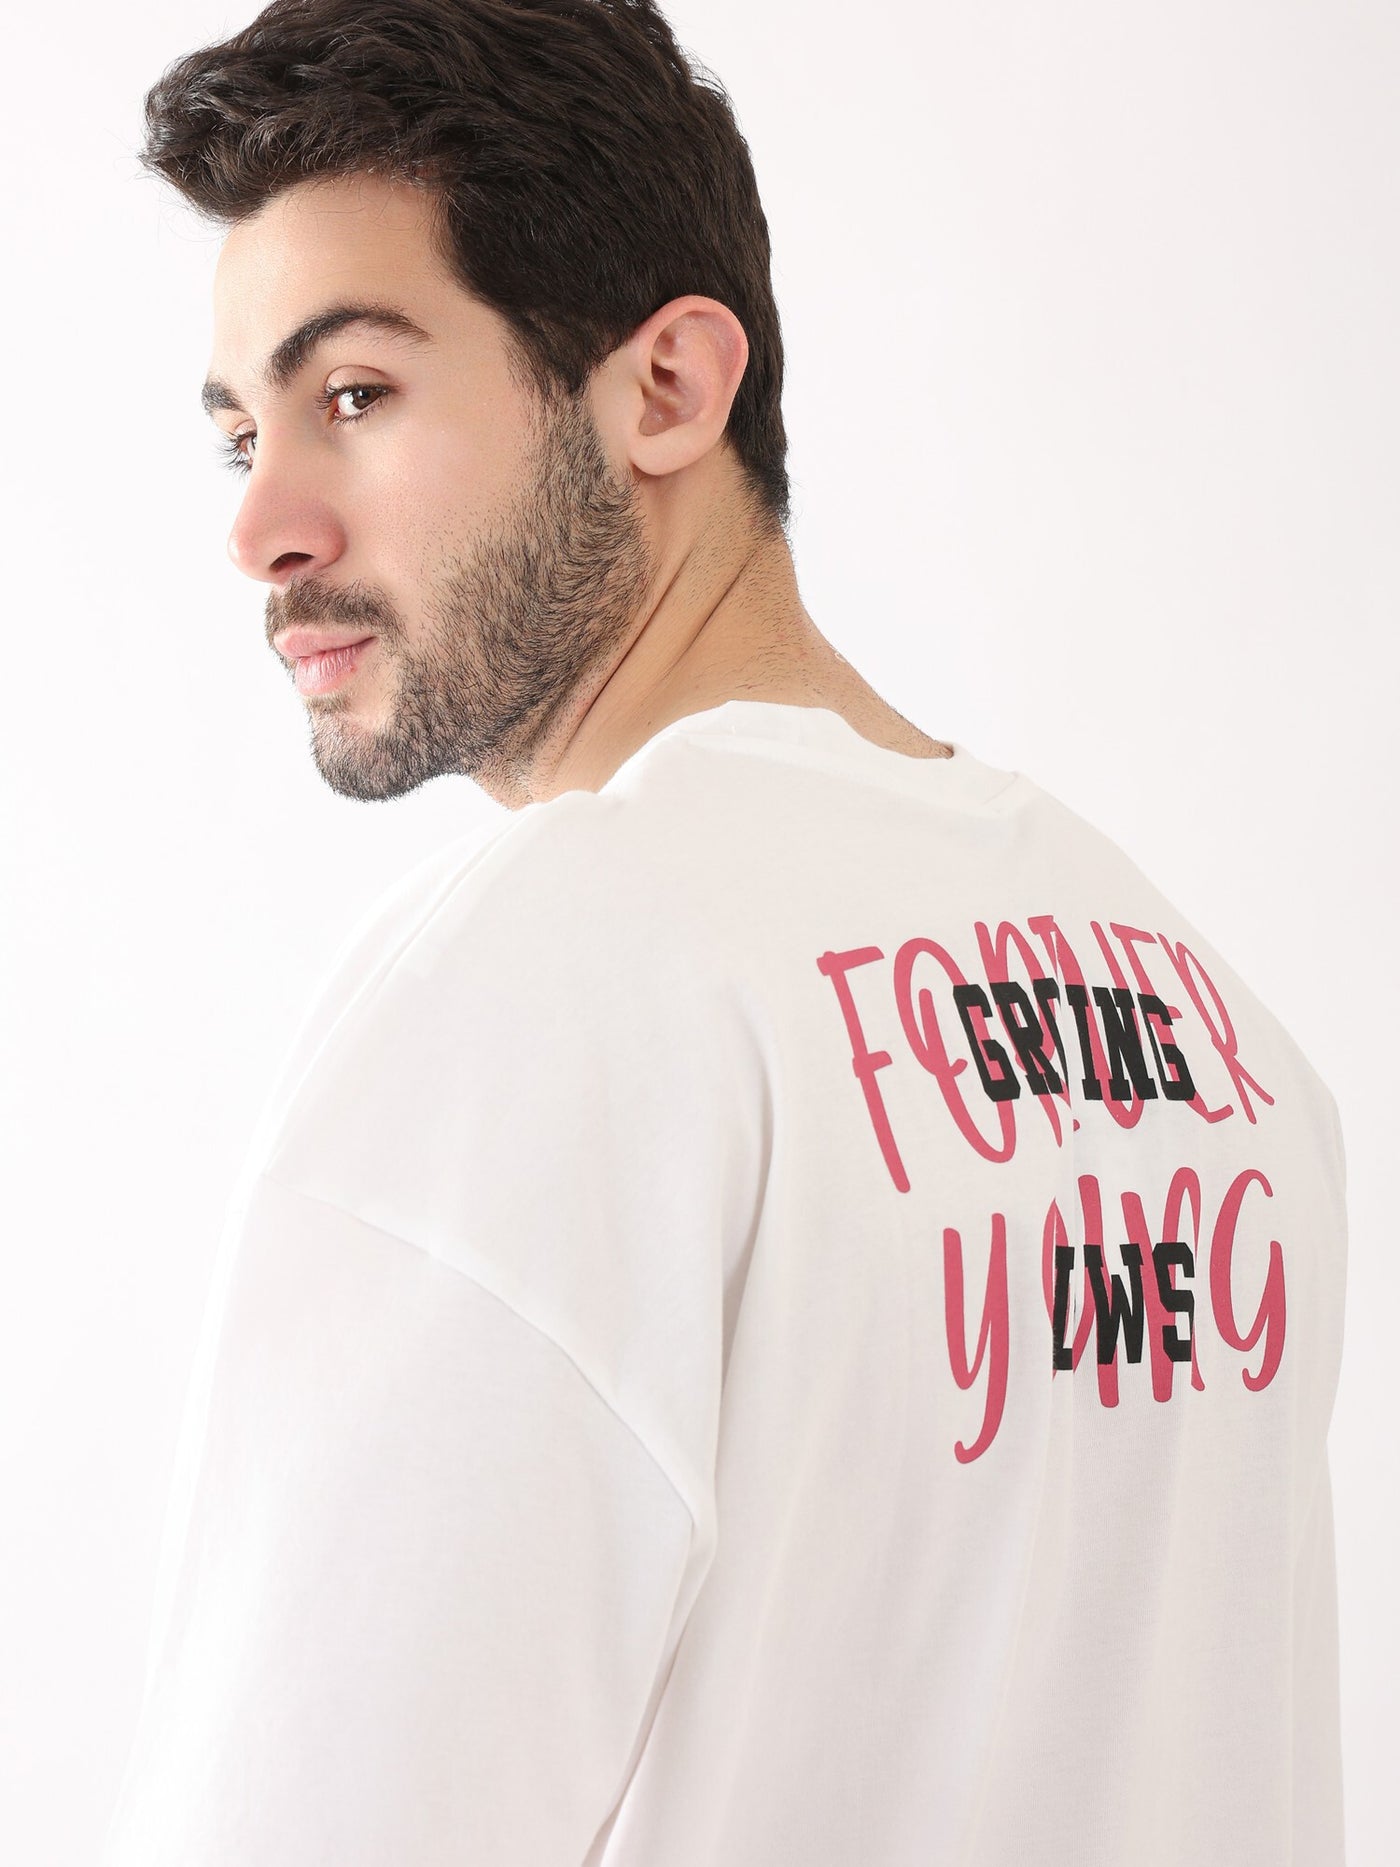 T-Shirt - "Forever Young" - Oversized